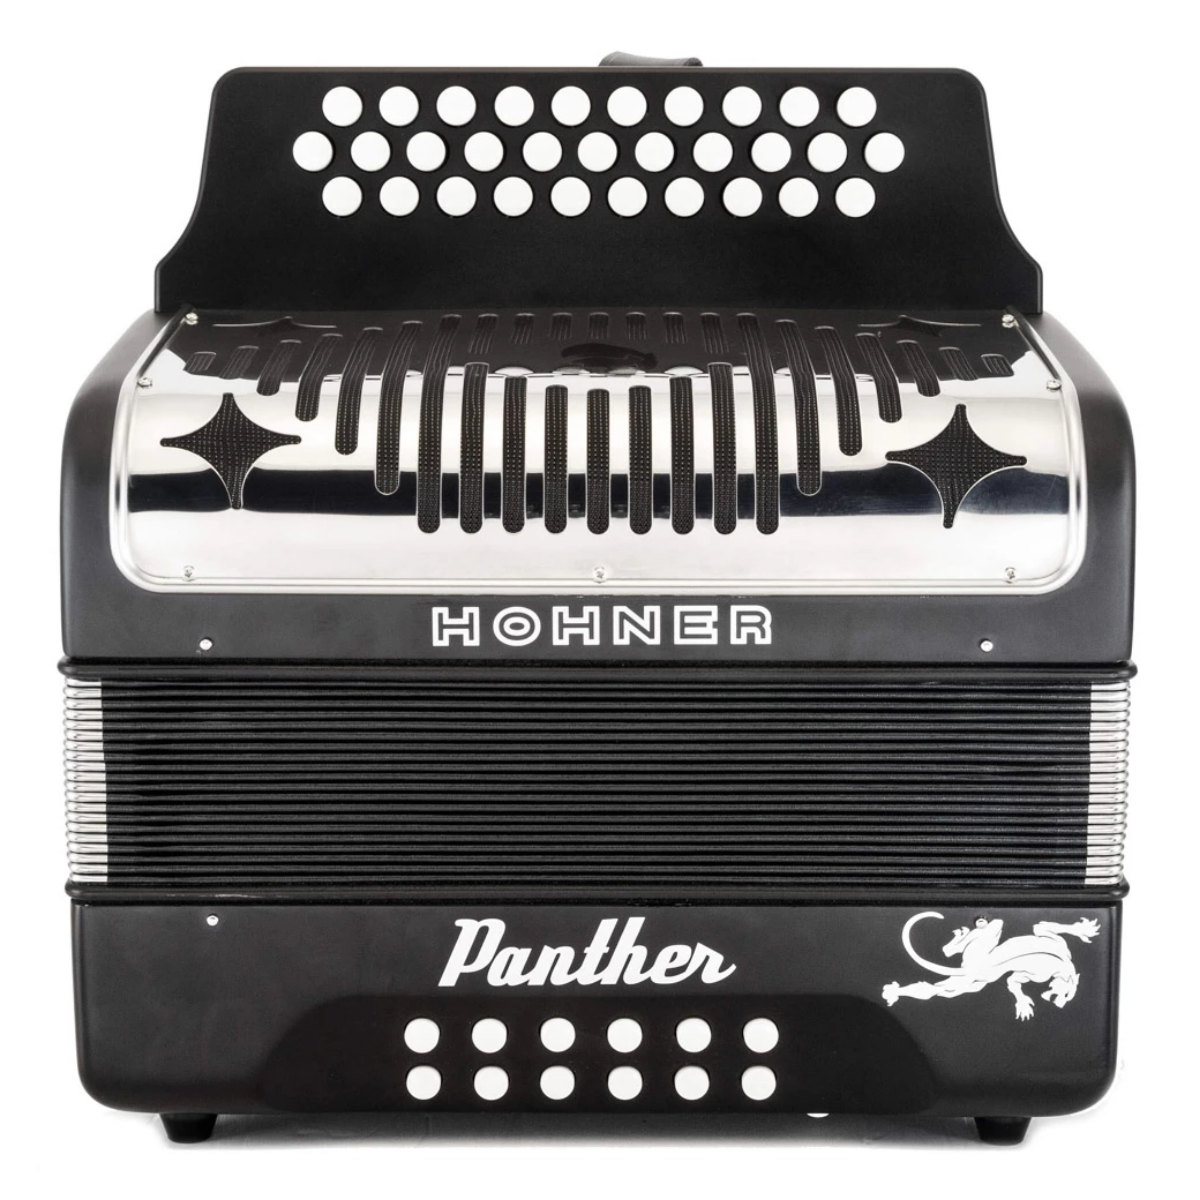 ACORD. HOHNER PANTHER FA-SIB-MIB A4840S – Equipos Musicales y Electrónica